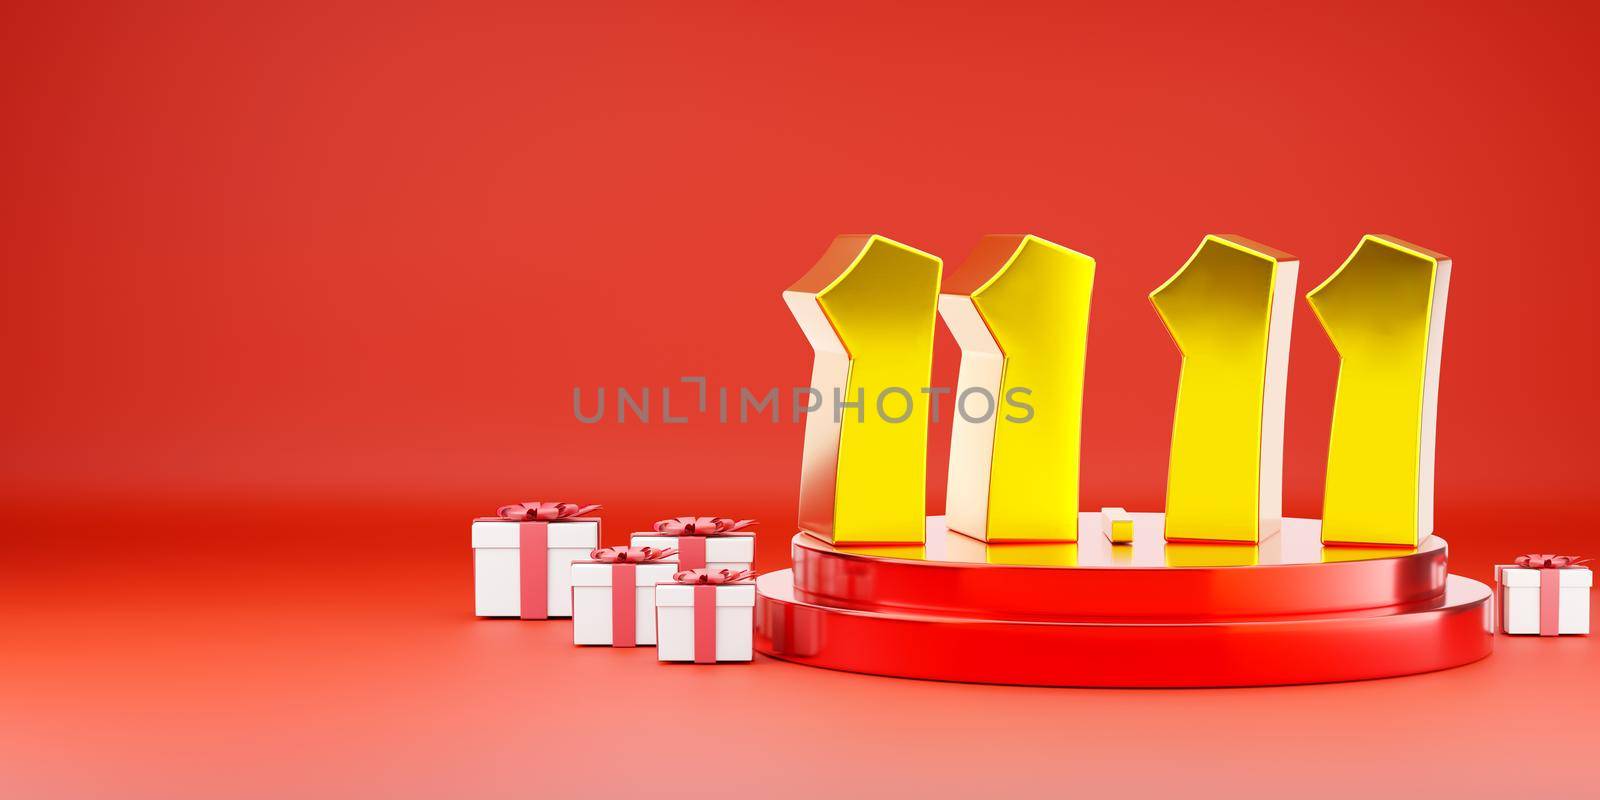 11.11 Single day sale. Banner 11 number on podium scene with gift box on red background, banner template design for social media and website, Sale promotion super shopping day concept, 3D illustration